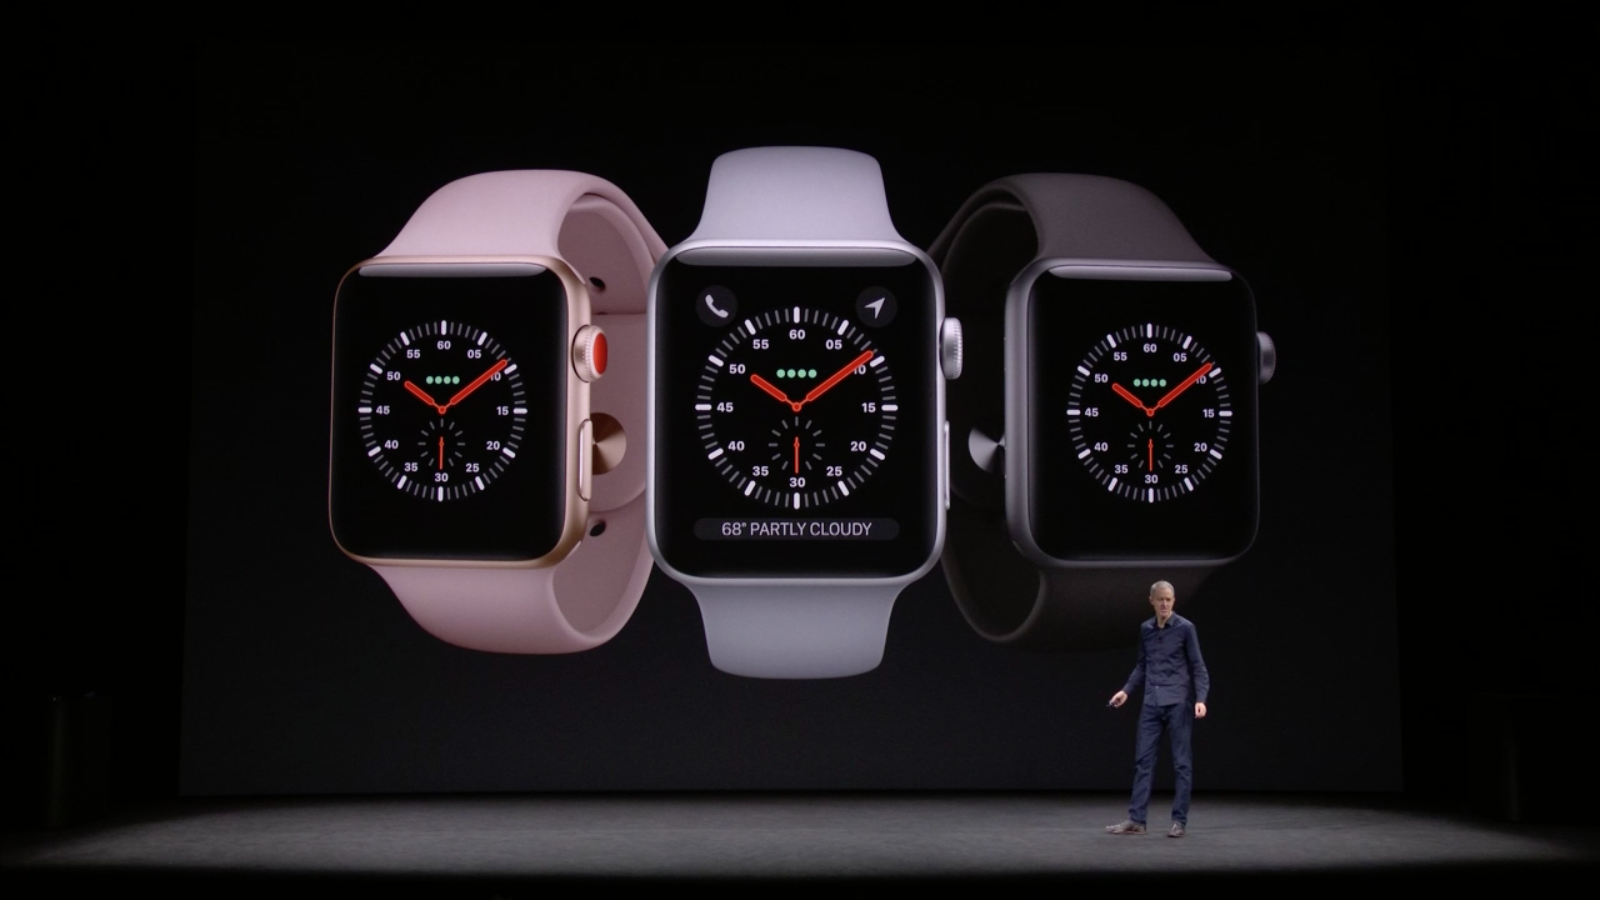 Apple Admits Its Brand-New Watch Has Trouble Connecting To Cell Service